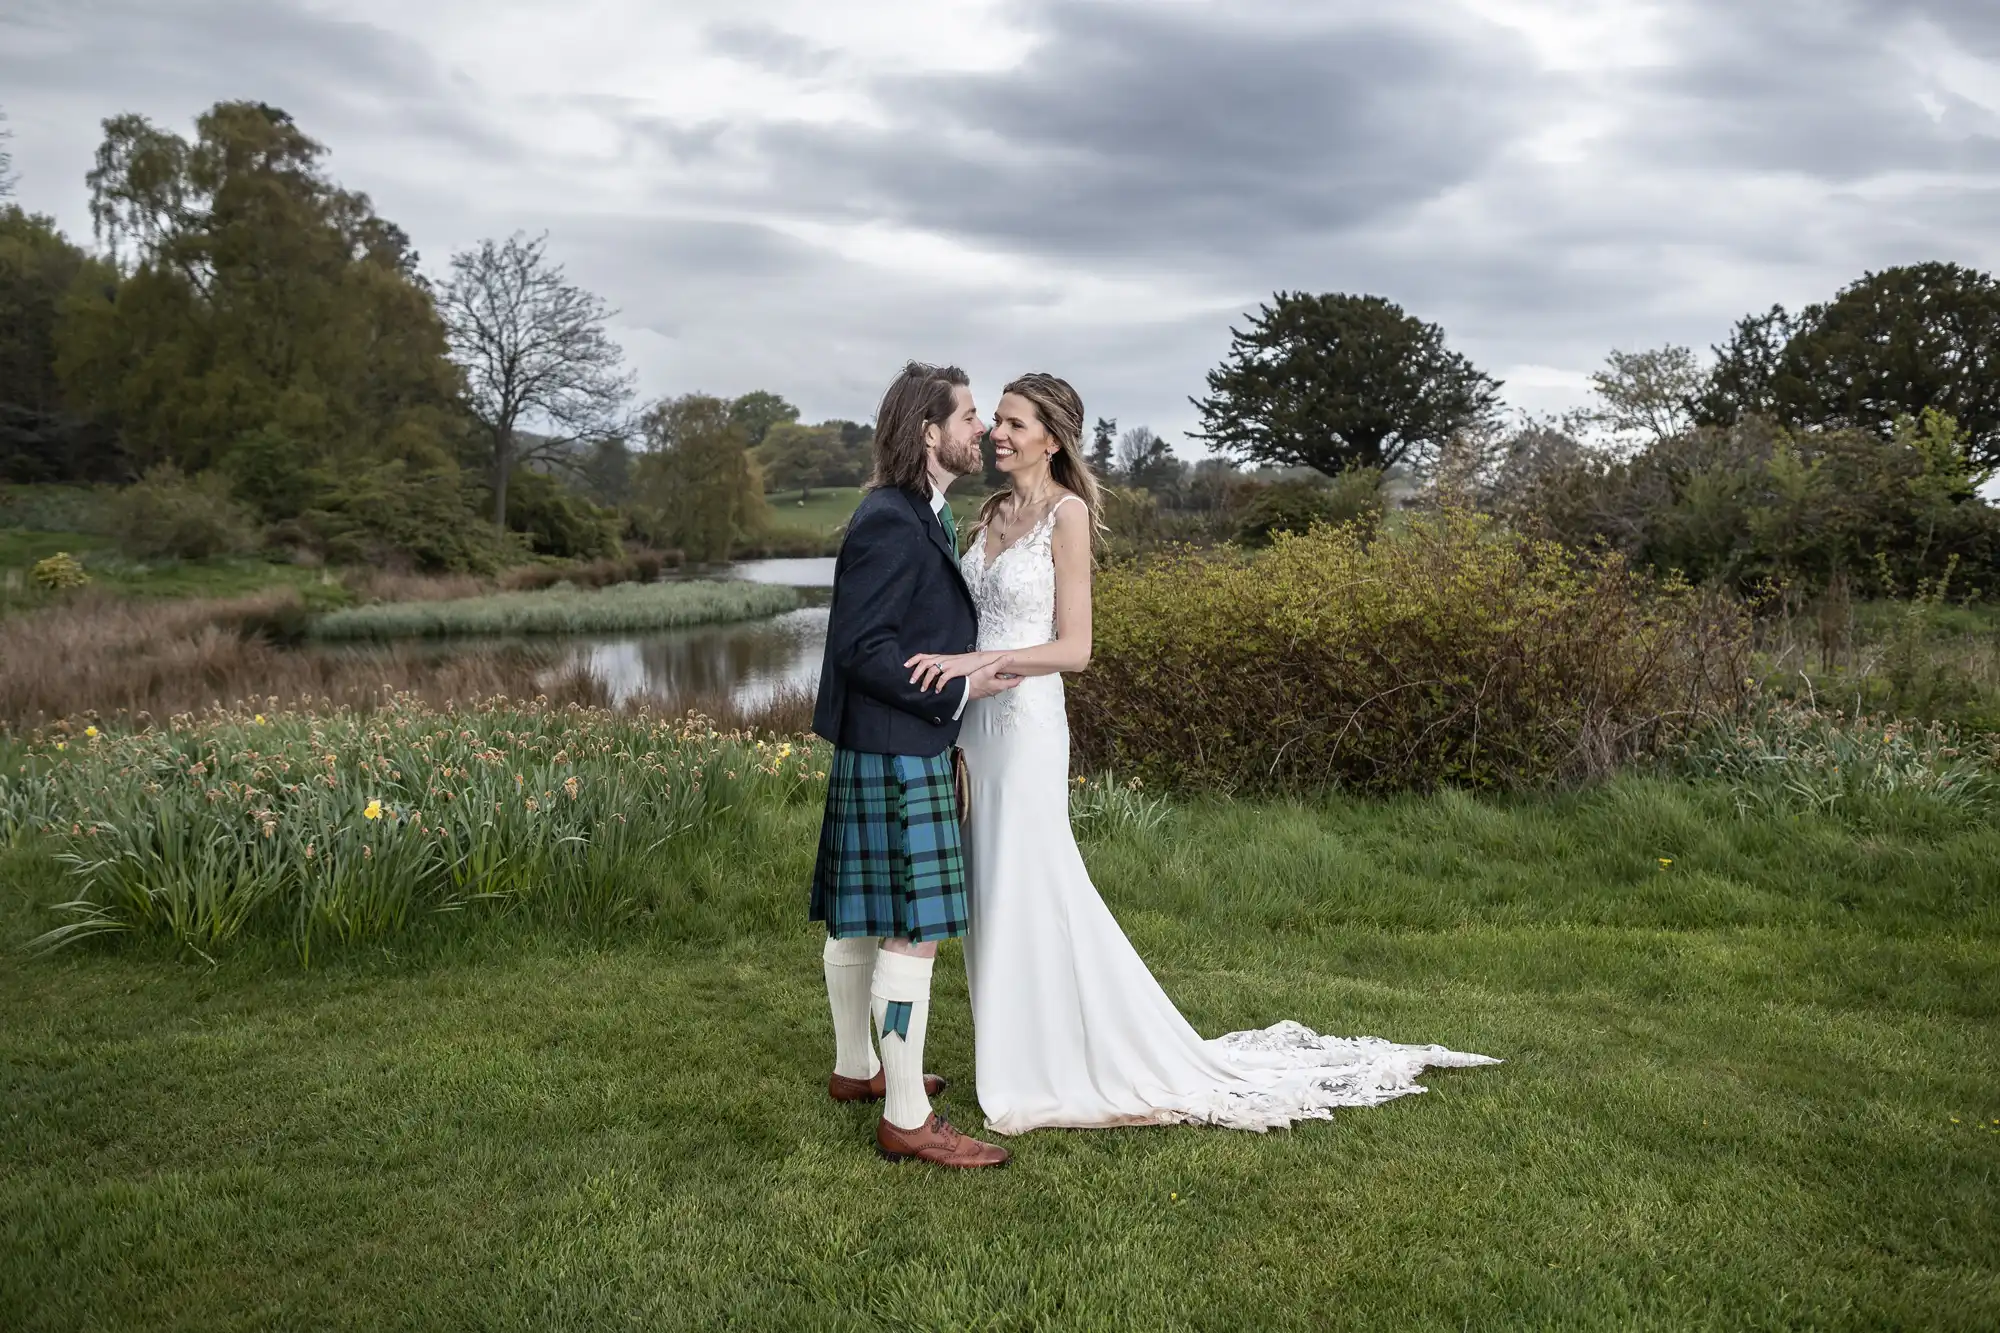 A couple dressed in wedding attire stands on a grassy area near a pond, with the man wearing a kilt and the woman in a white gown, under a cloudy sky.